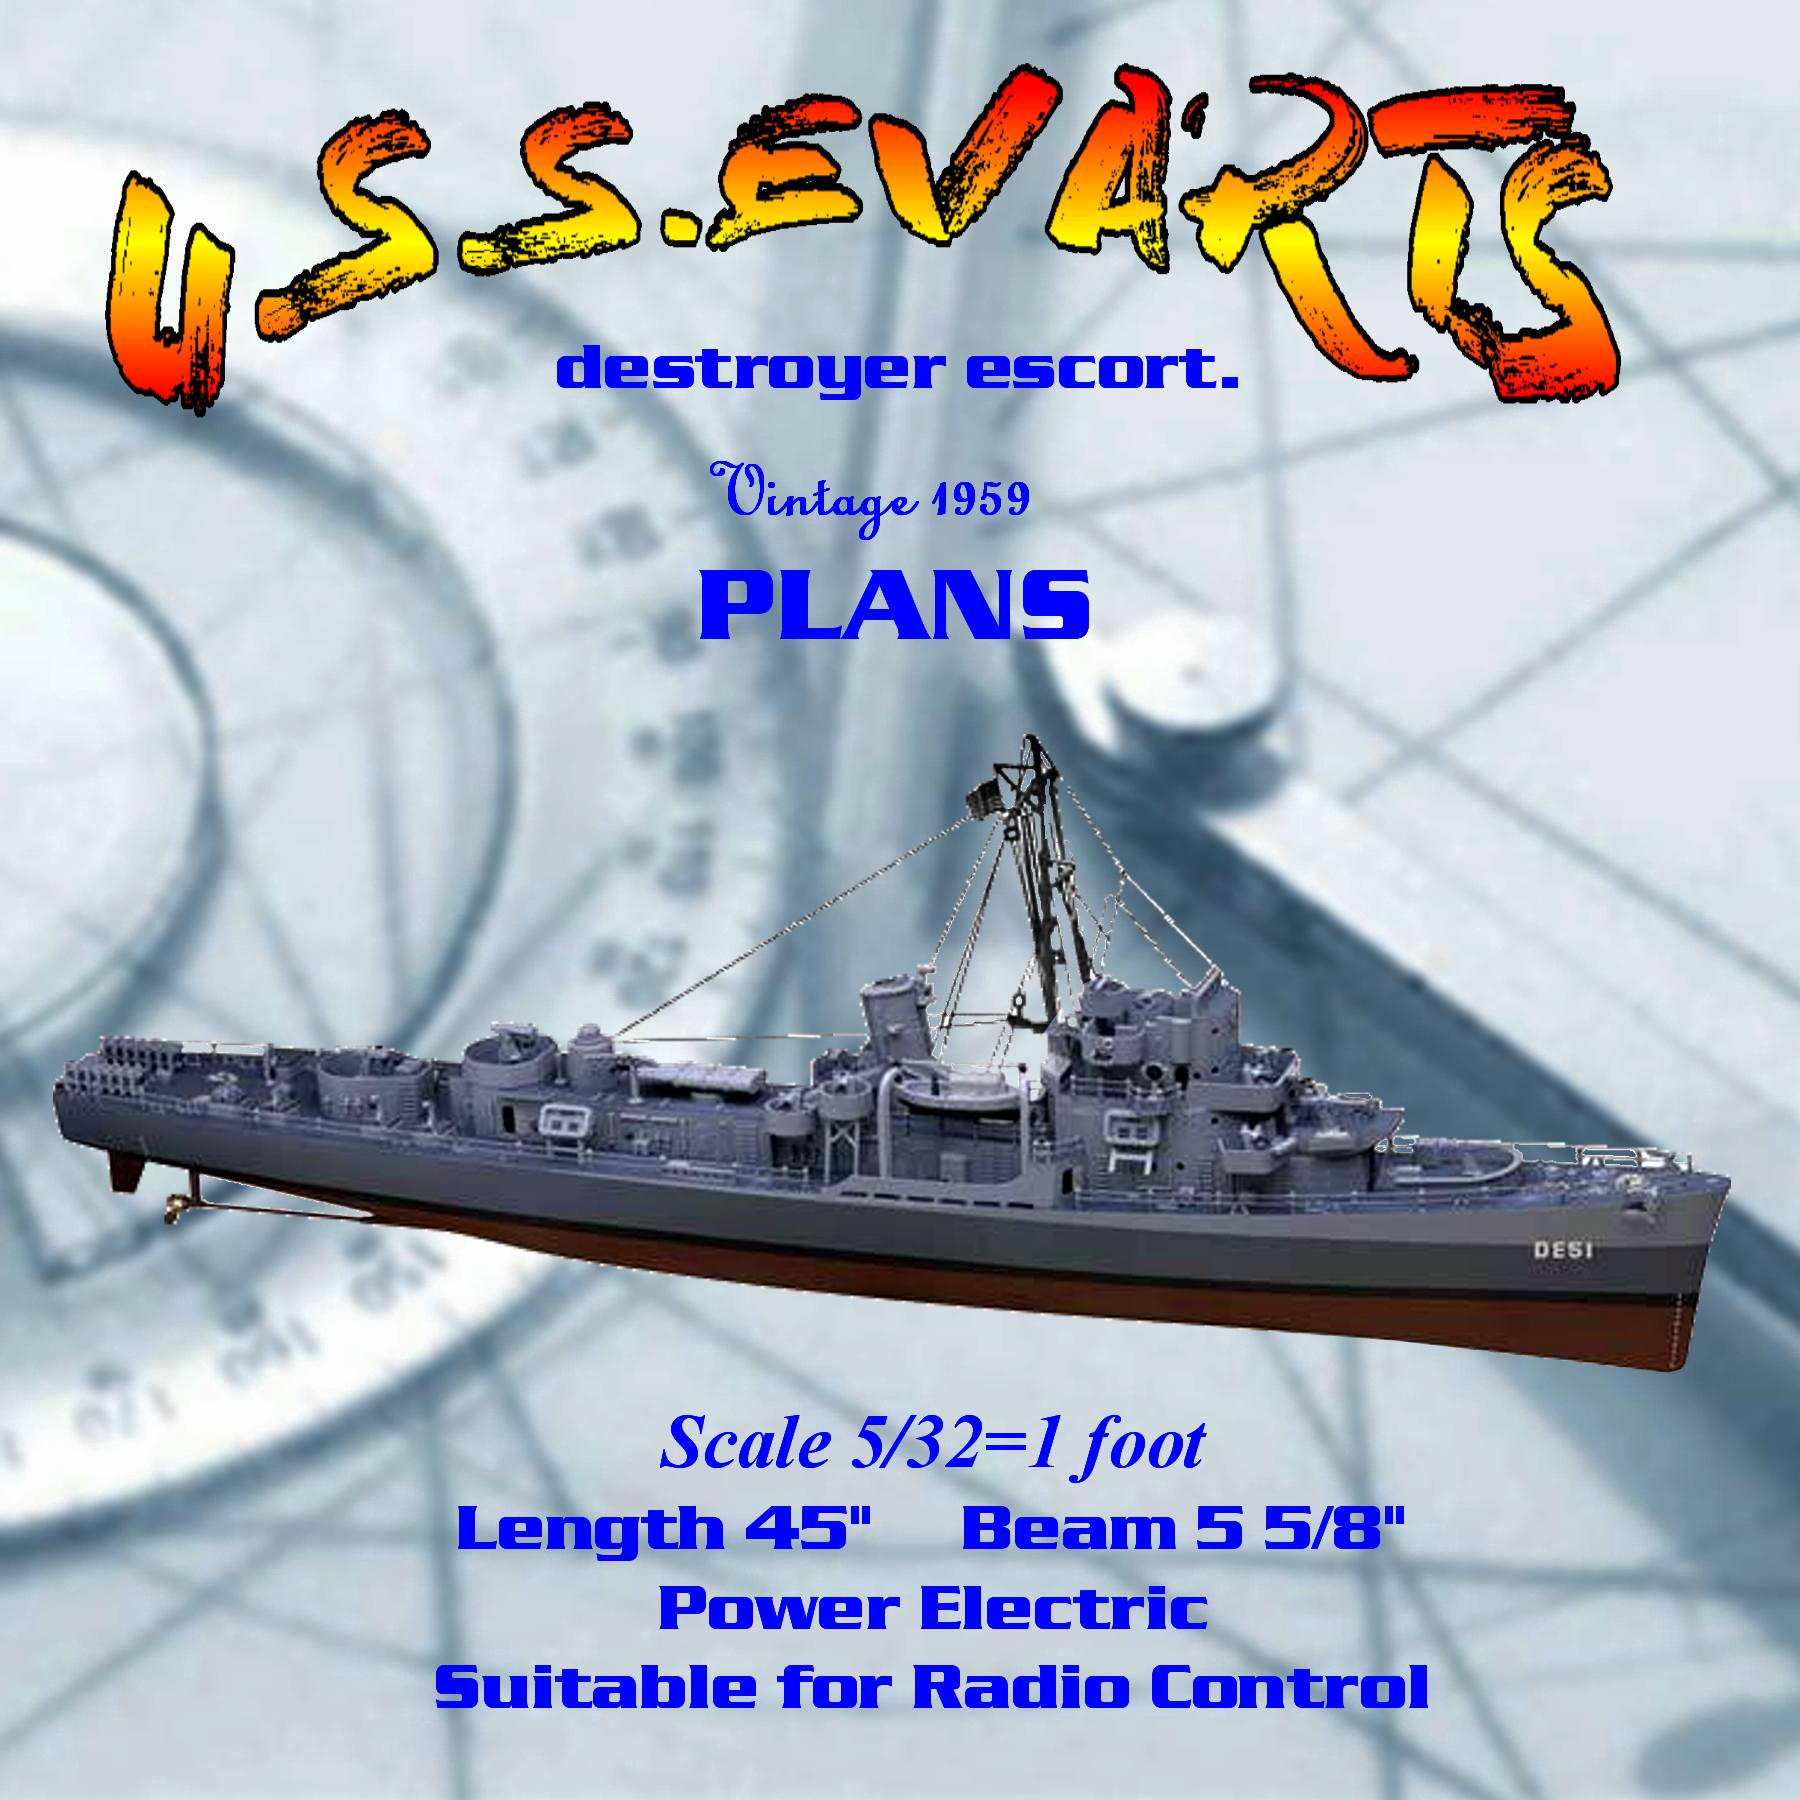 full size printed plan to build a scale u.s.s. evarts  destroyer escort suitable for radio control